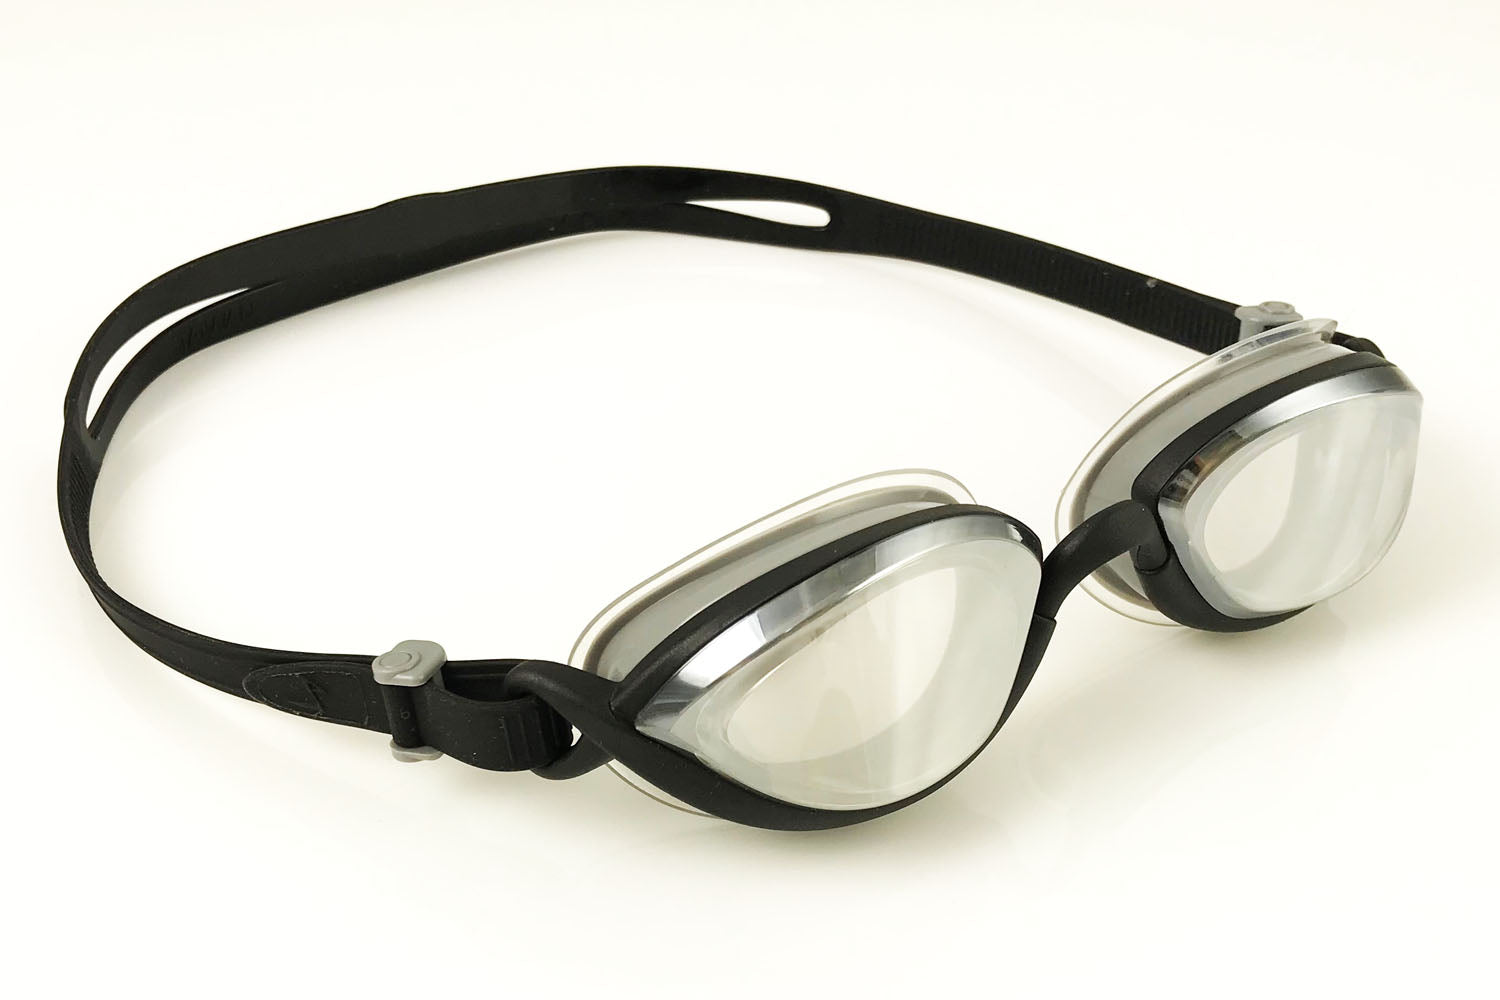 The Basilisk - Black with clear metallized lenses